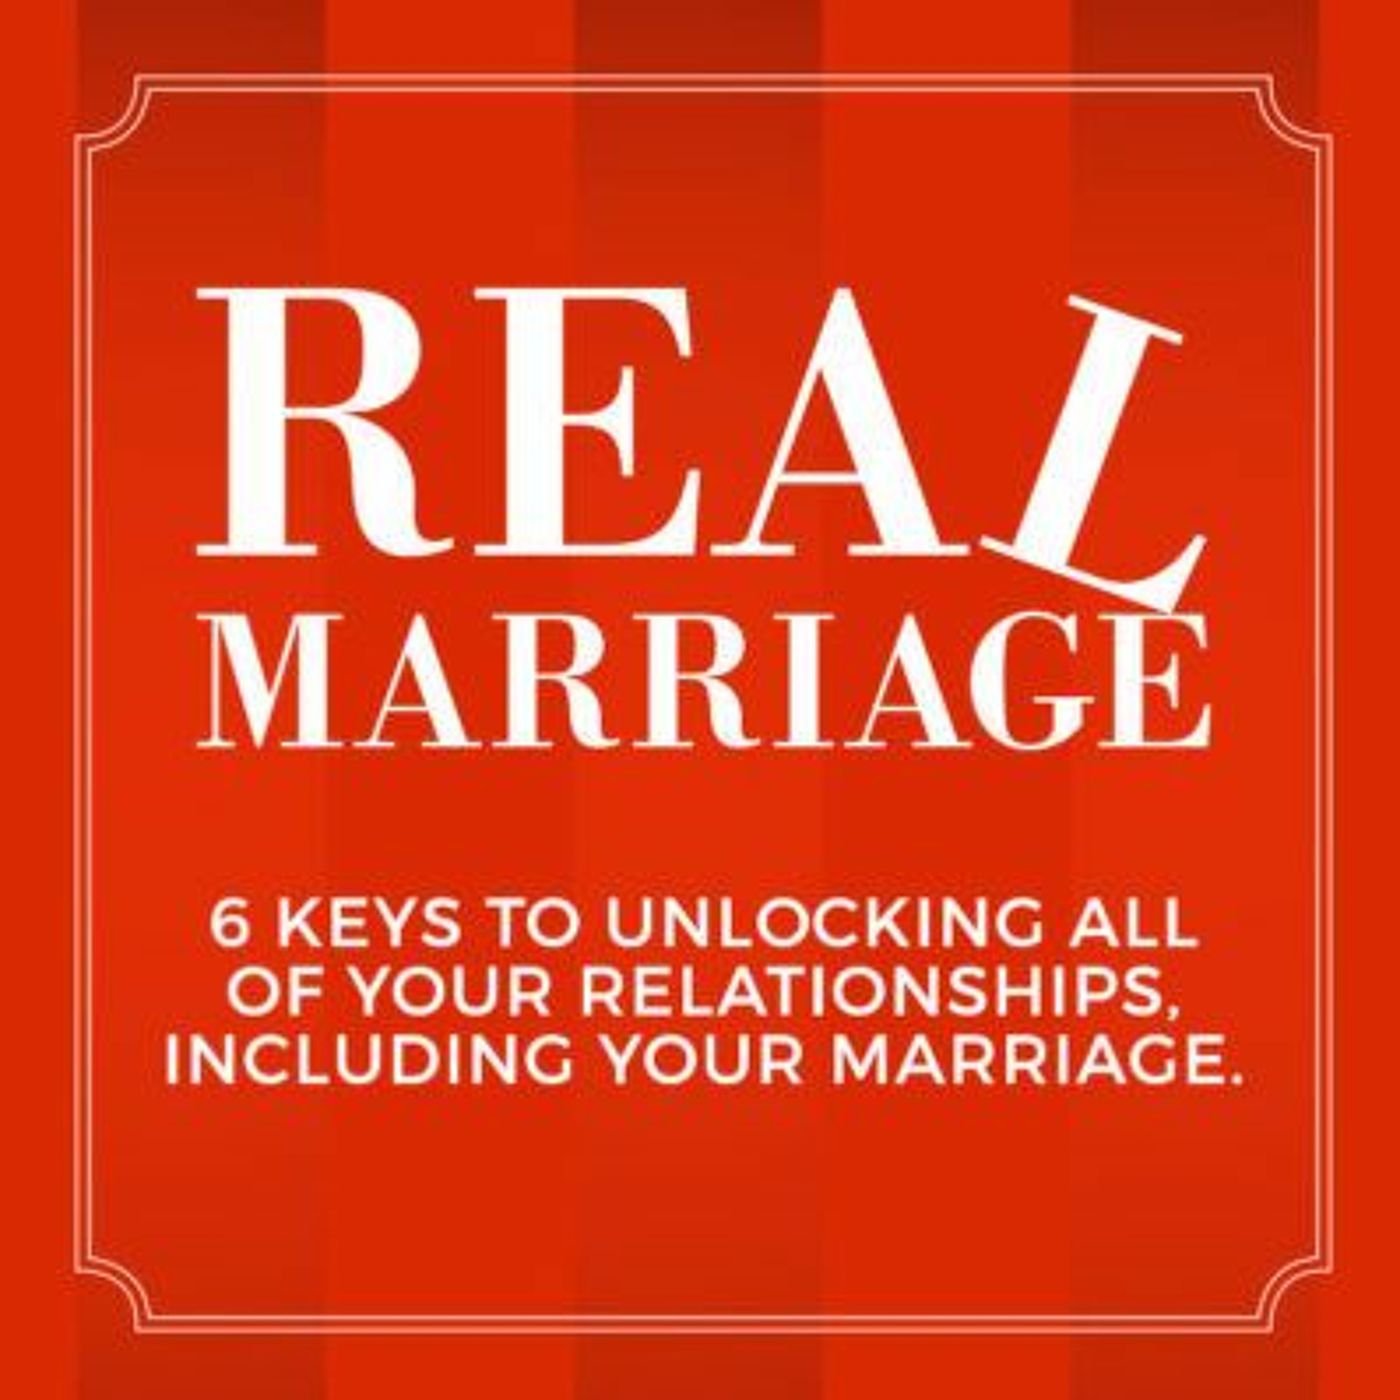 Real Marriage - Key #5 Putting More Fun In Your Friendship